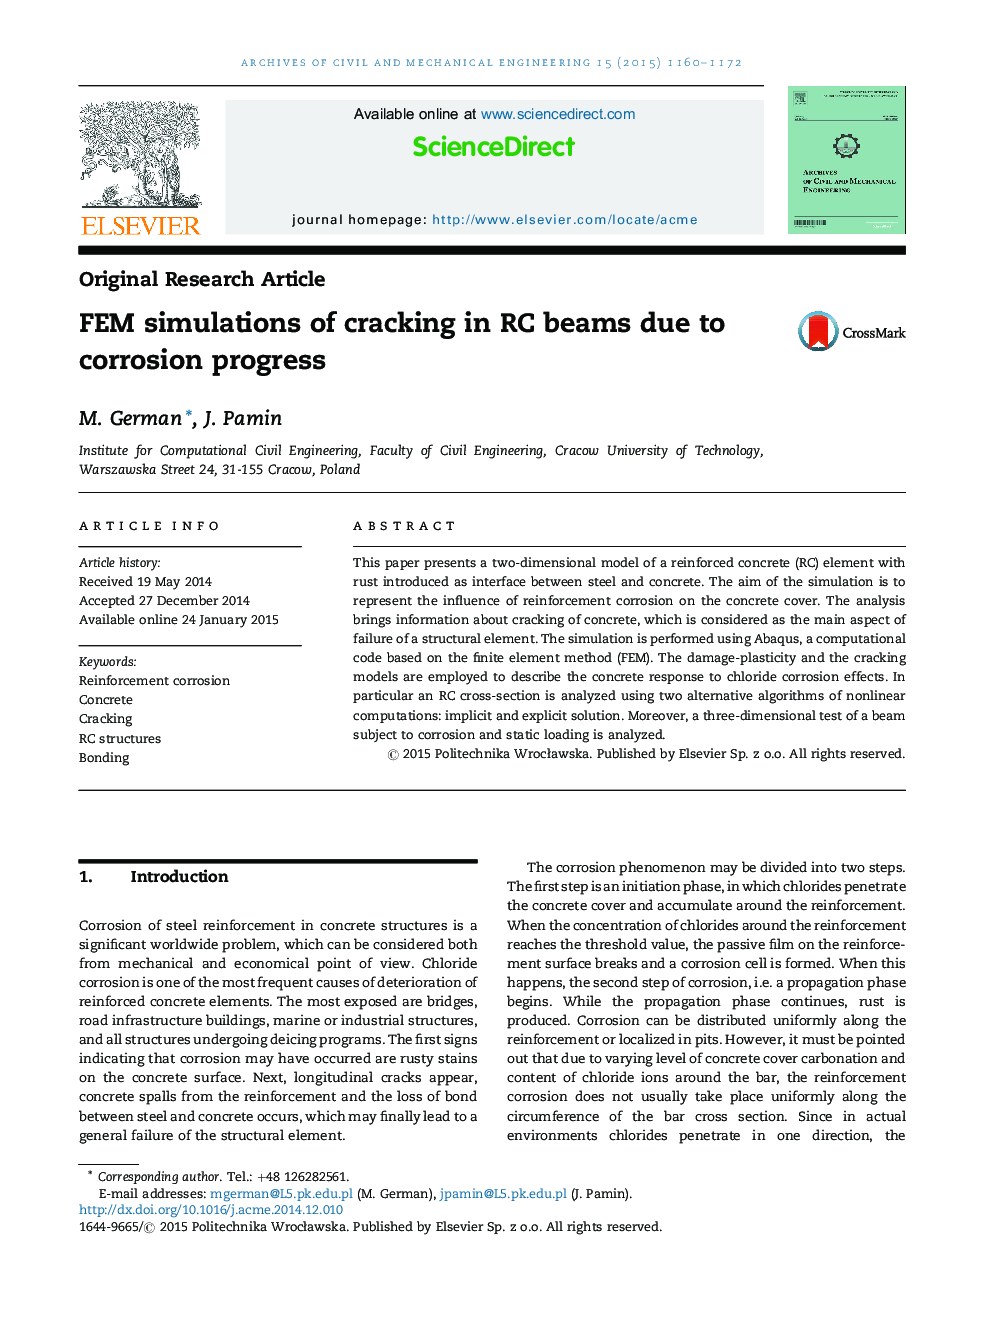 FEM simulations of cracking in RC beams due to corrosion progress